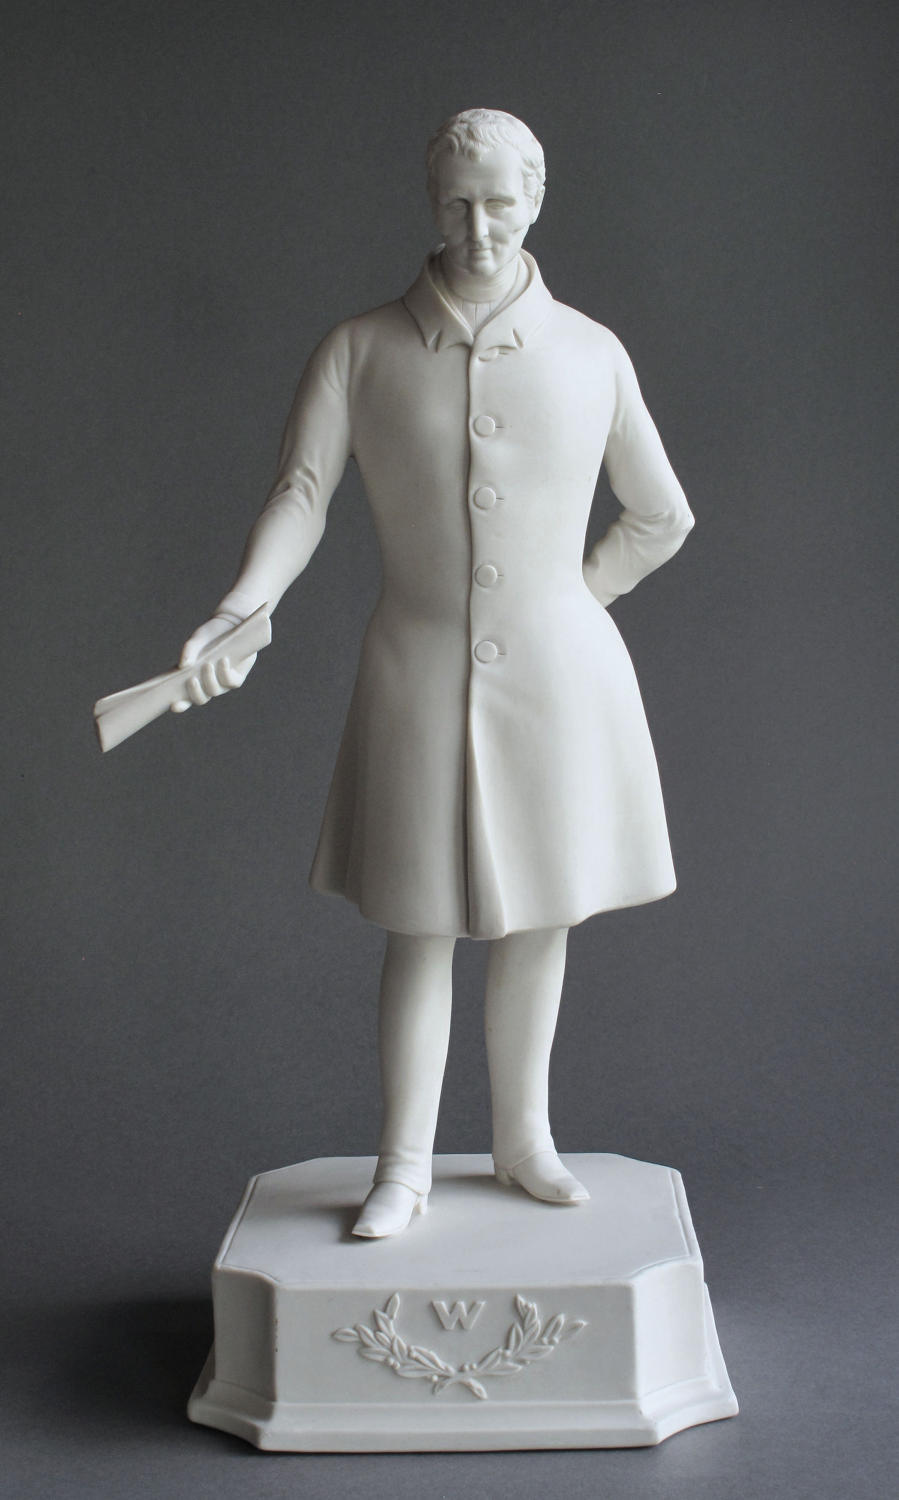 A rare Parian figure of The Duke of Wellington by Baguley